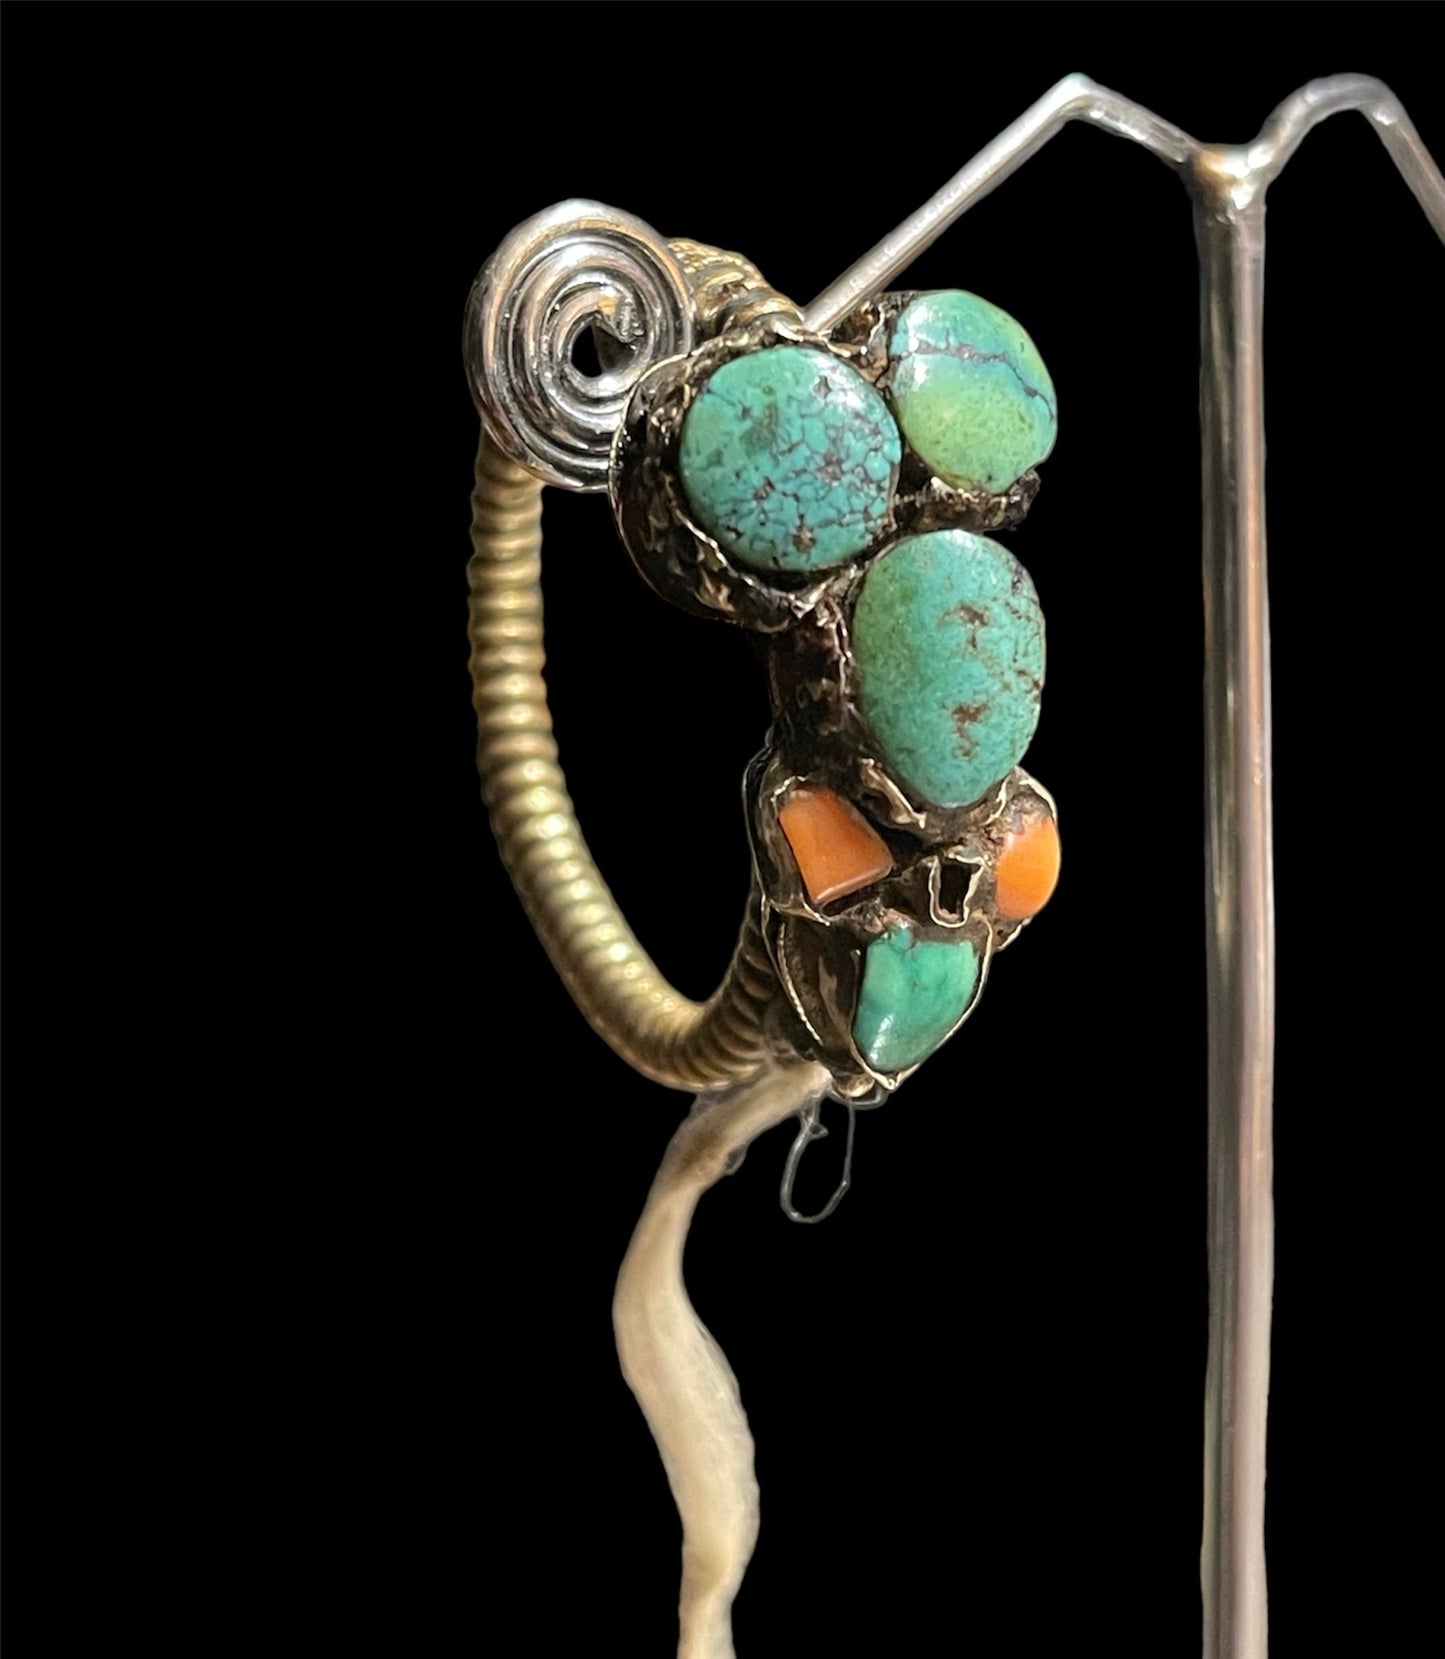 Tibetan antique turquoise and coral earring